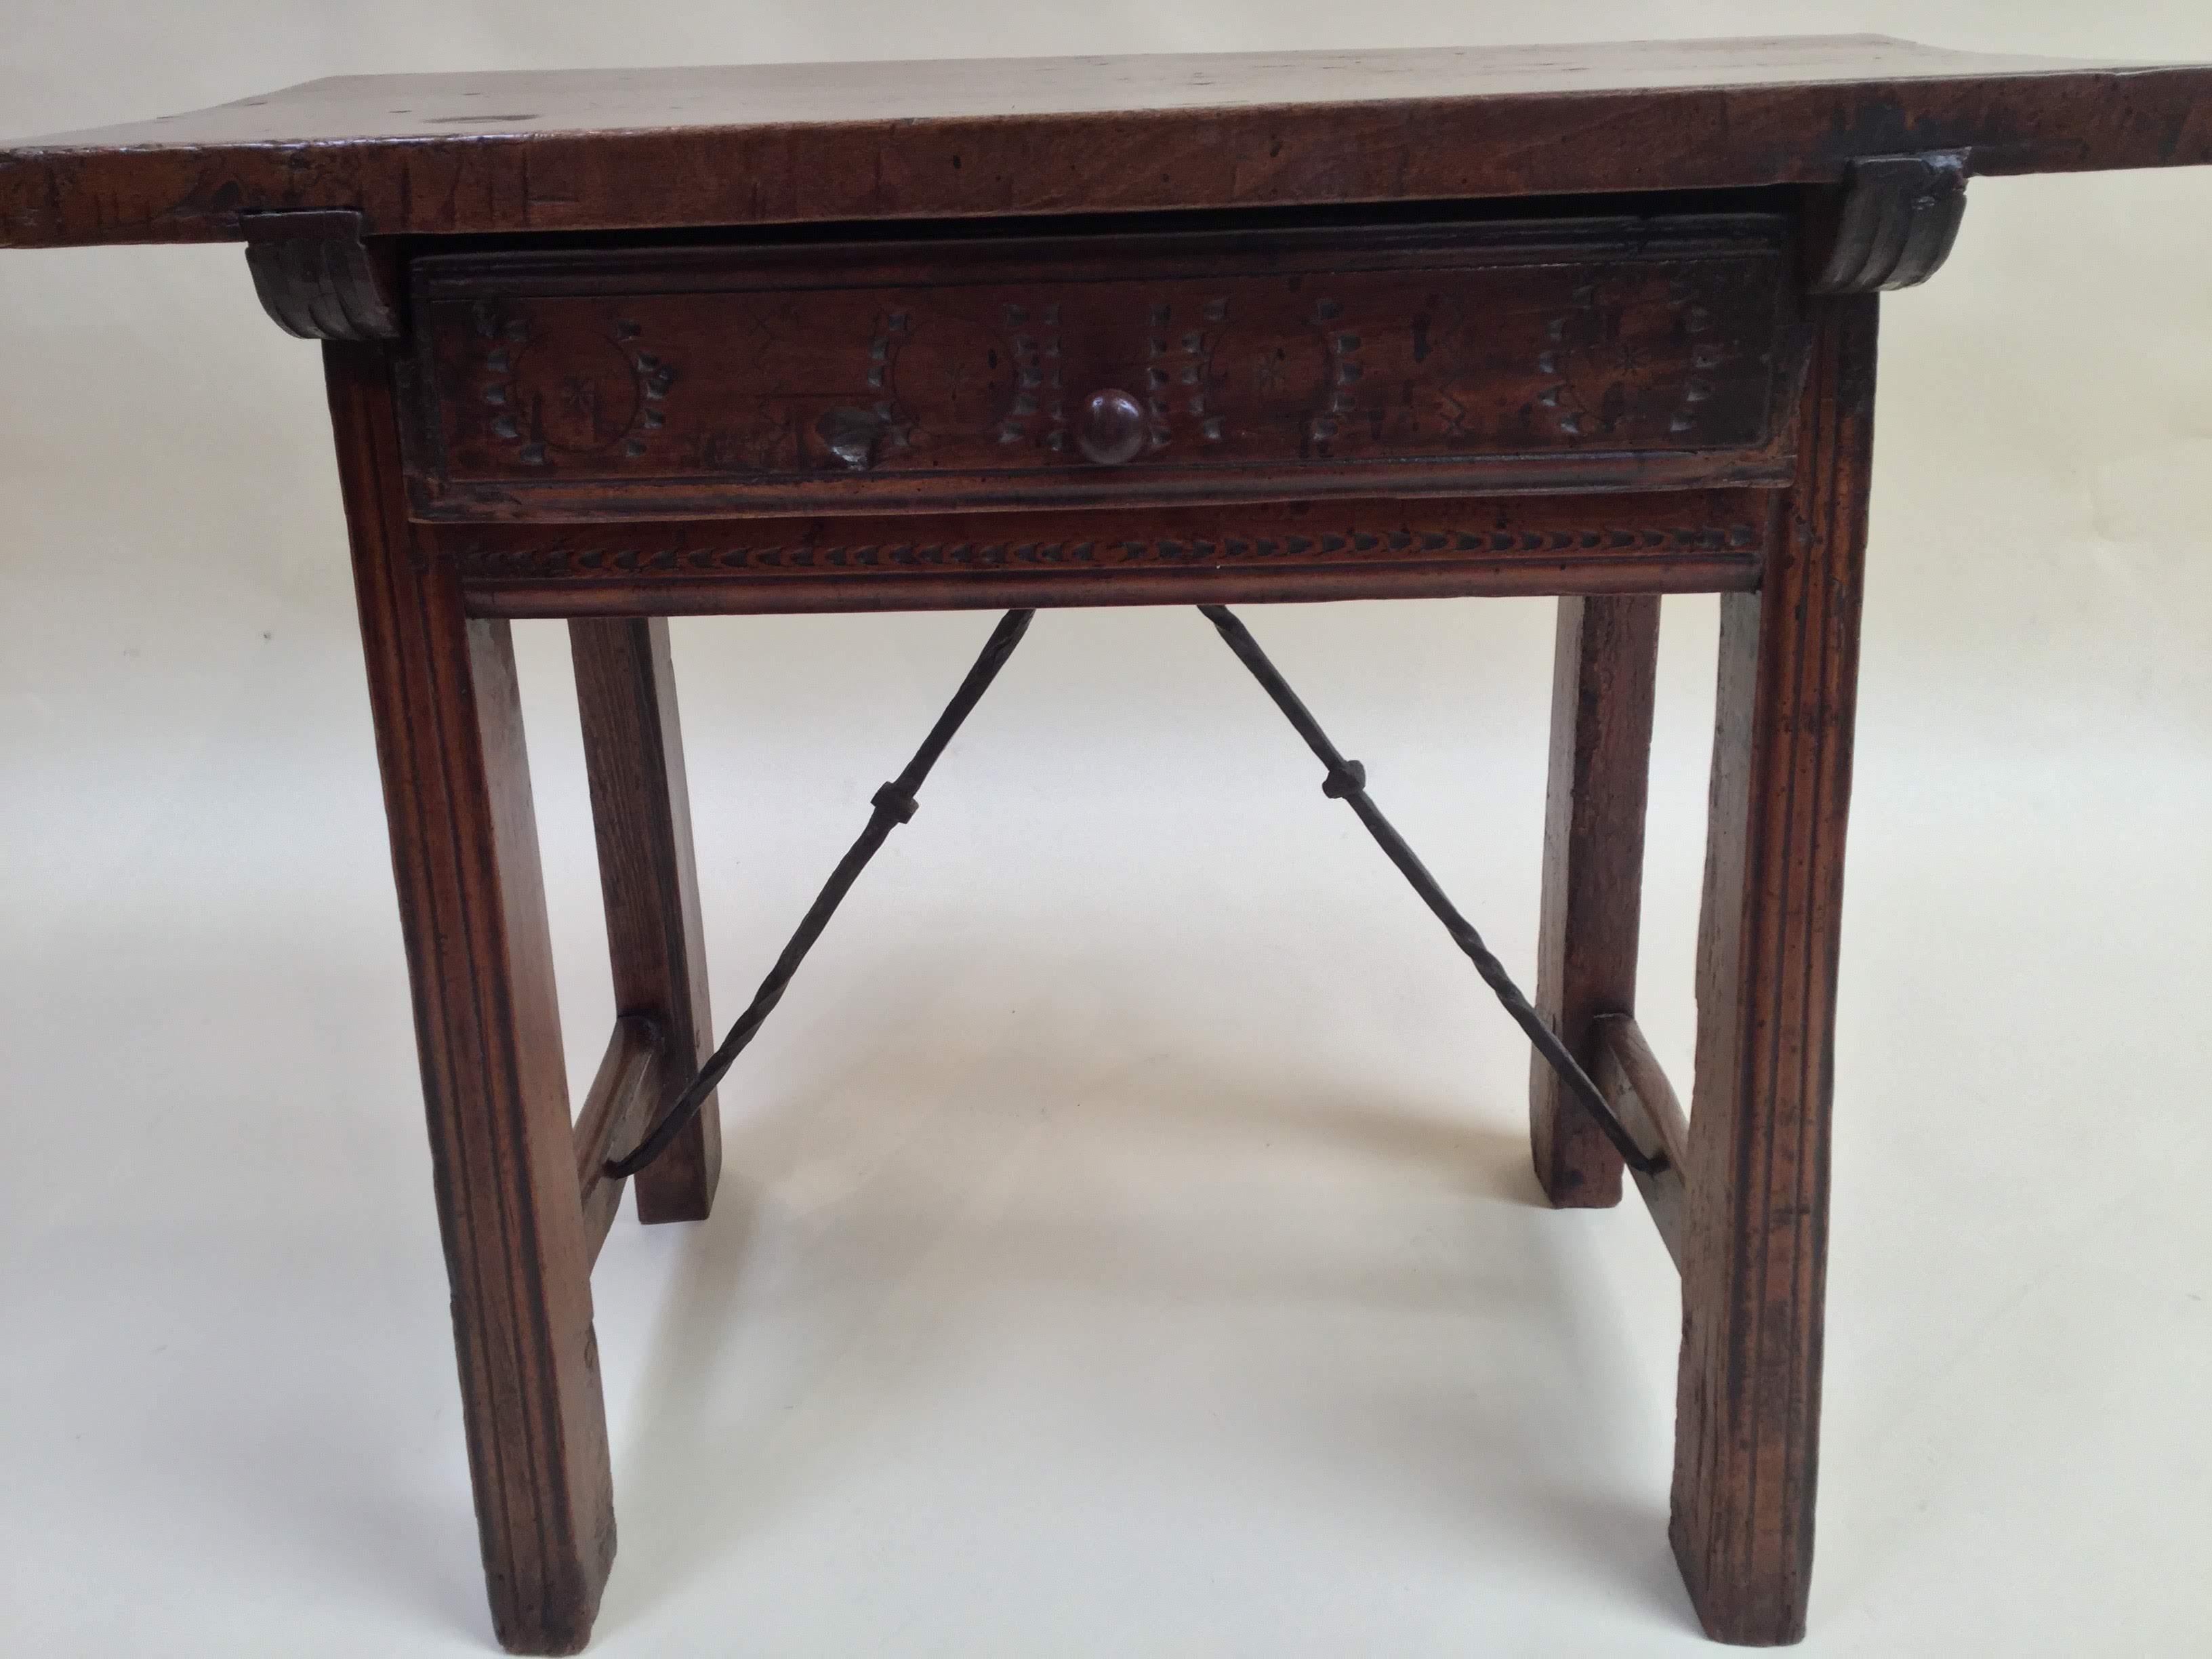 Hand-Crafted 18th Century Spanish Walnut Table with Iron Stretcher For Sale